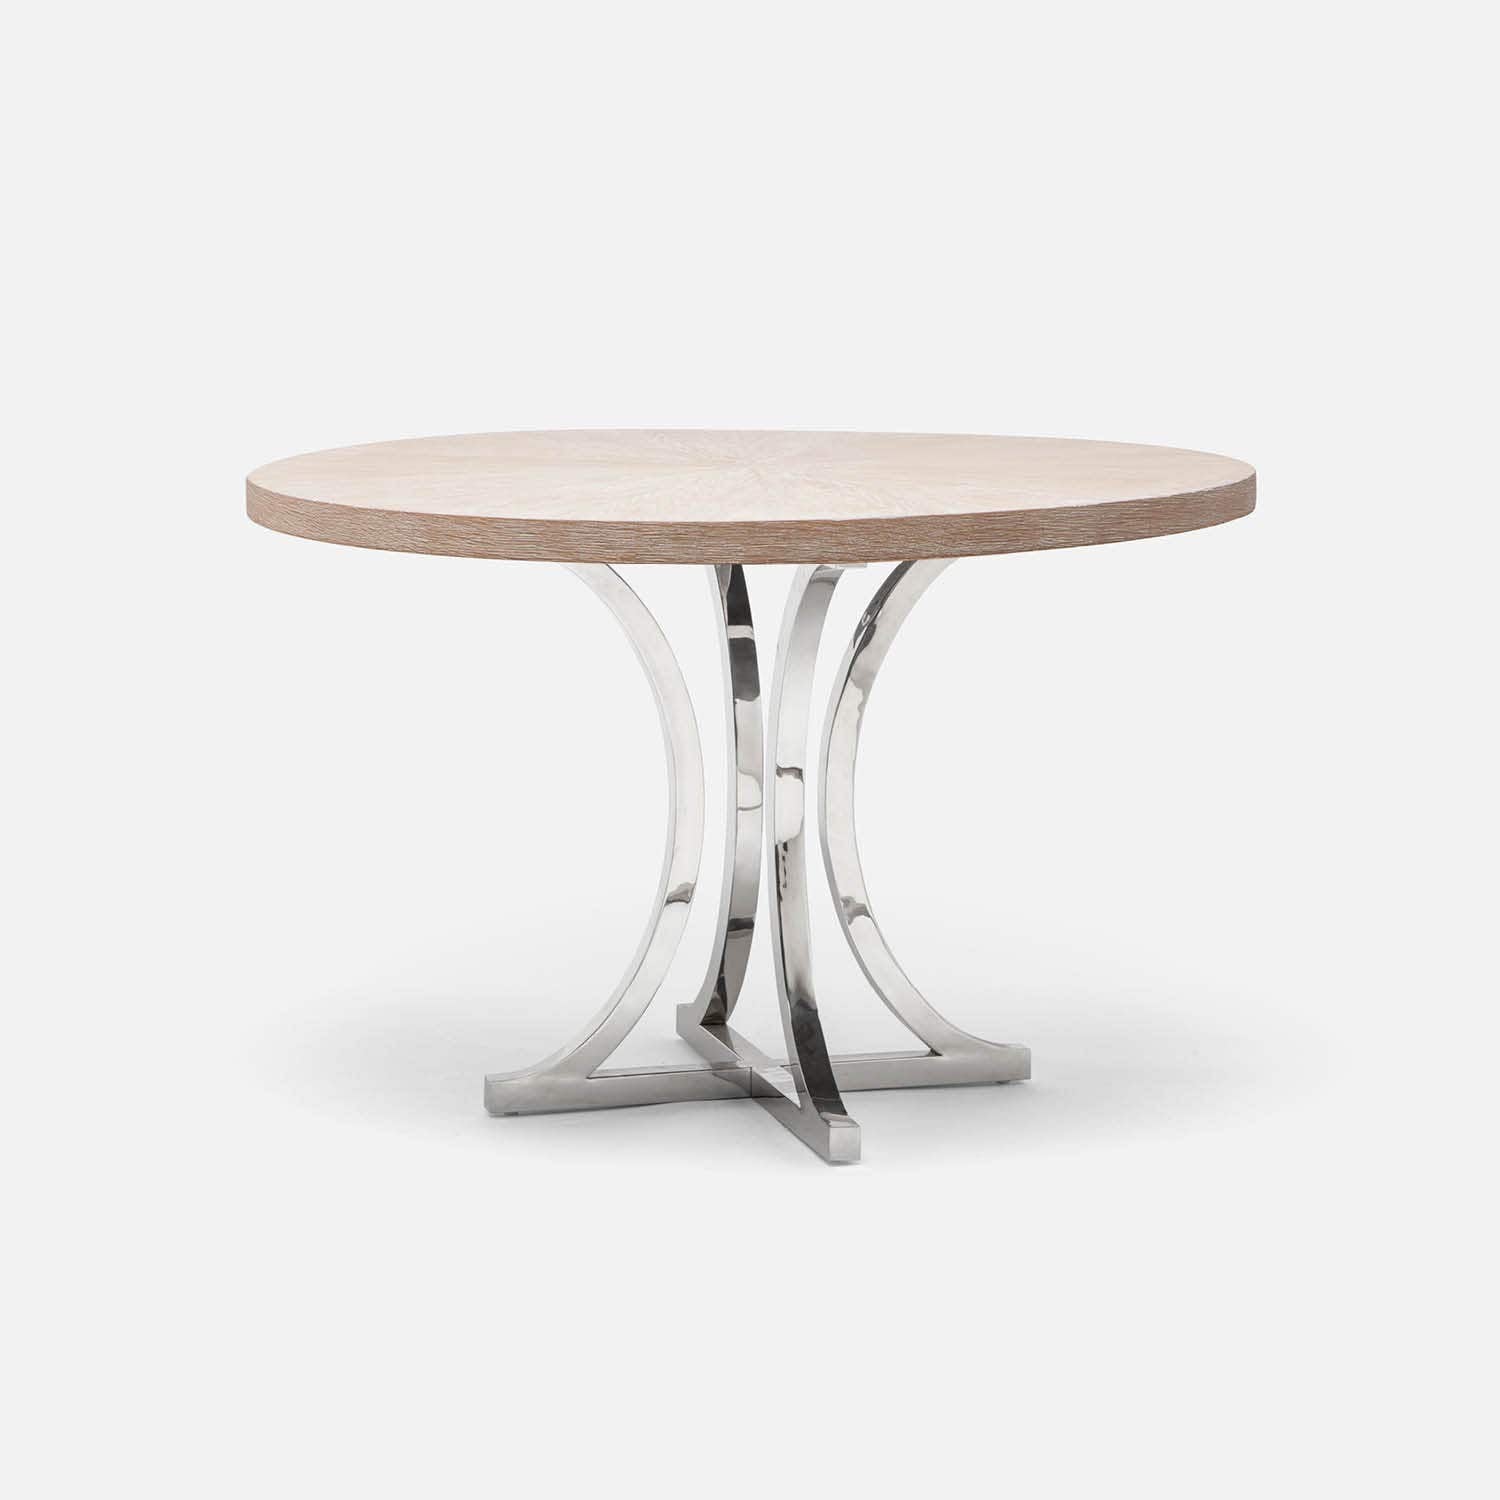 Made Goods Leighton 48" x 30" Polished Silver Steel Dinning Table With Round White Cerused Oak Table Top